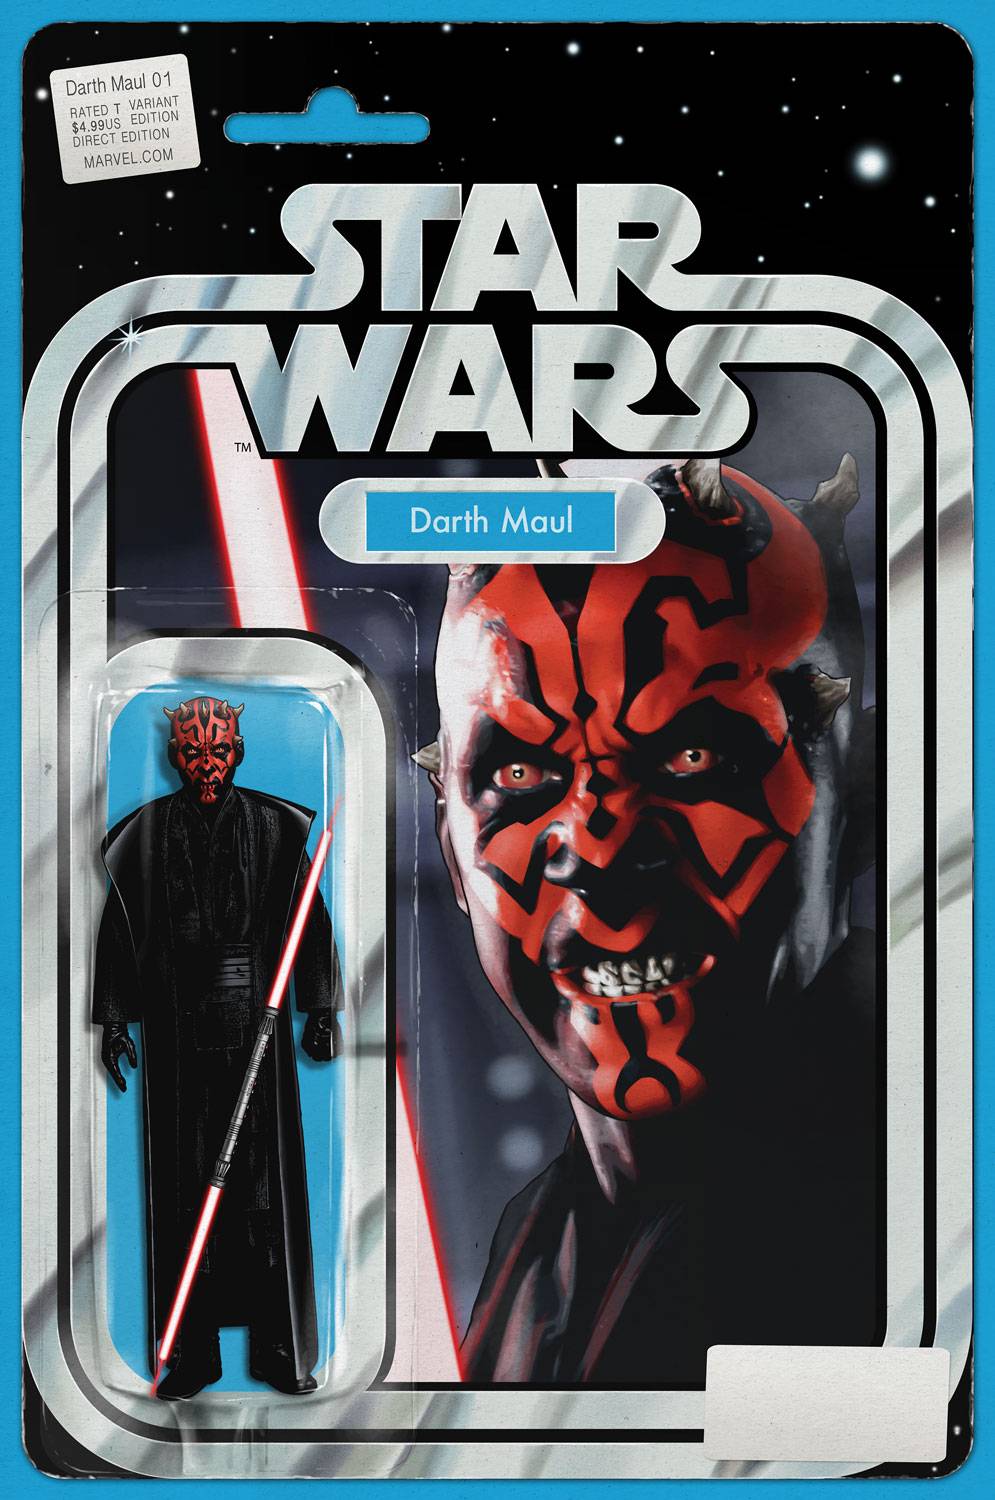 696202_darth-maul-1-christopher-action-figure-variant